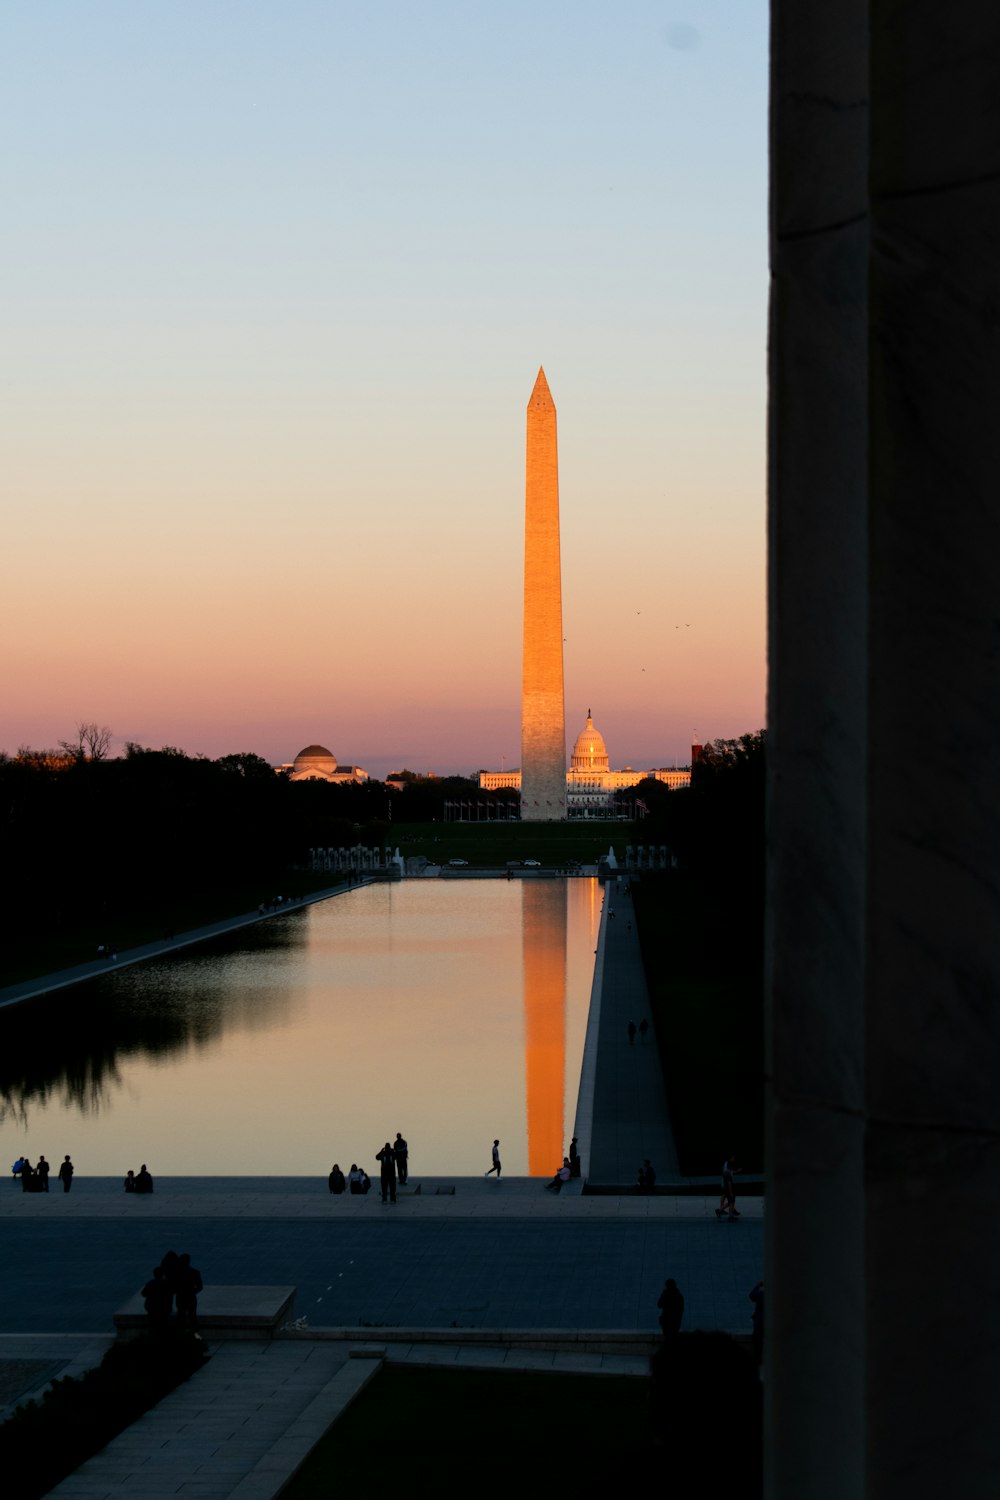 a view of the washington monument from across the reflecting pool